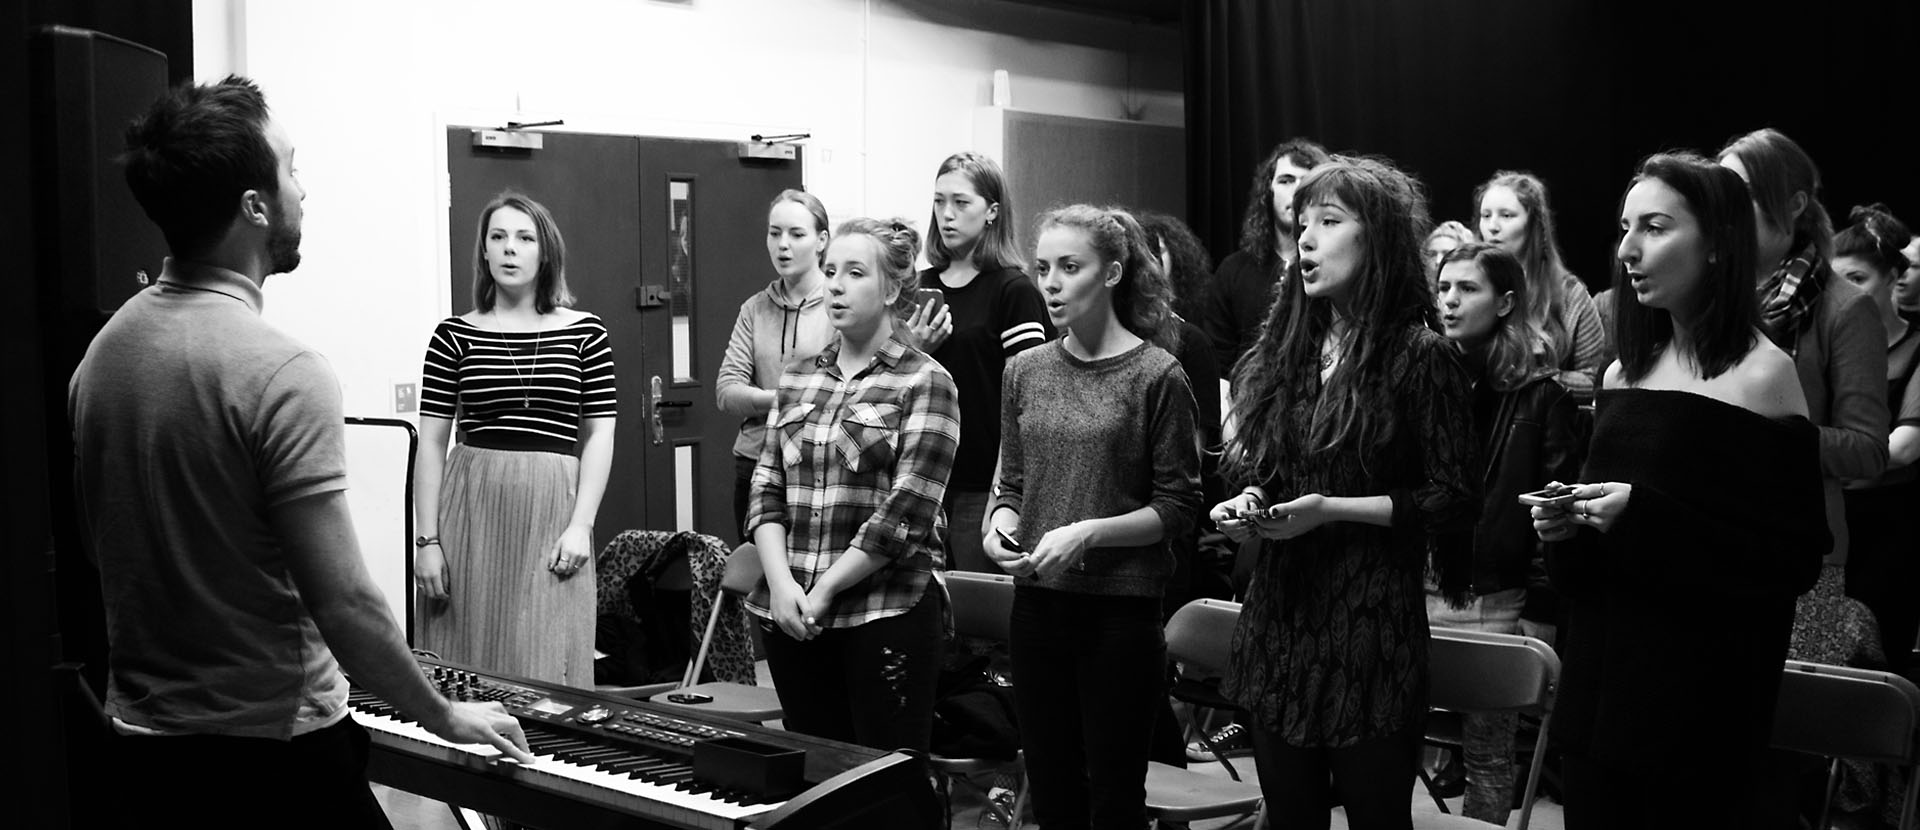 Solent music and performance students taking part in a singing workshop